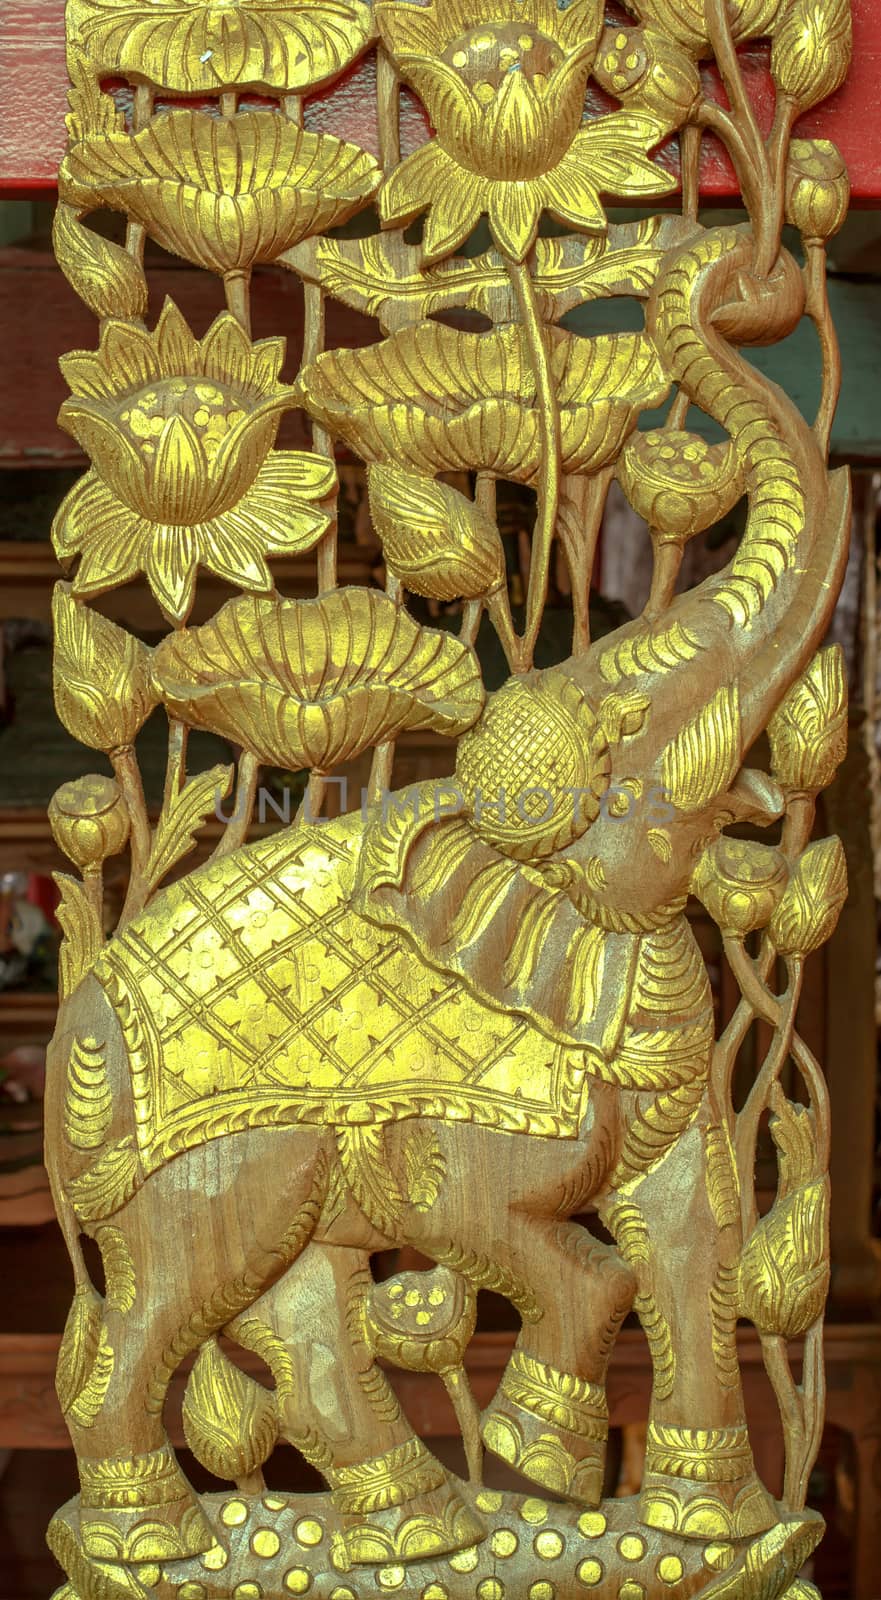 Wood carved Elephant is beautiful in Thailand.